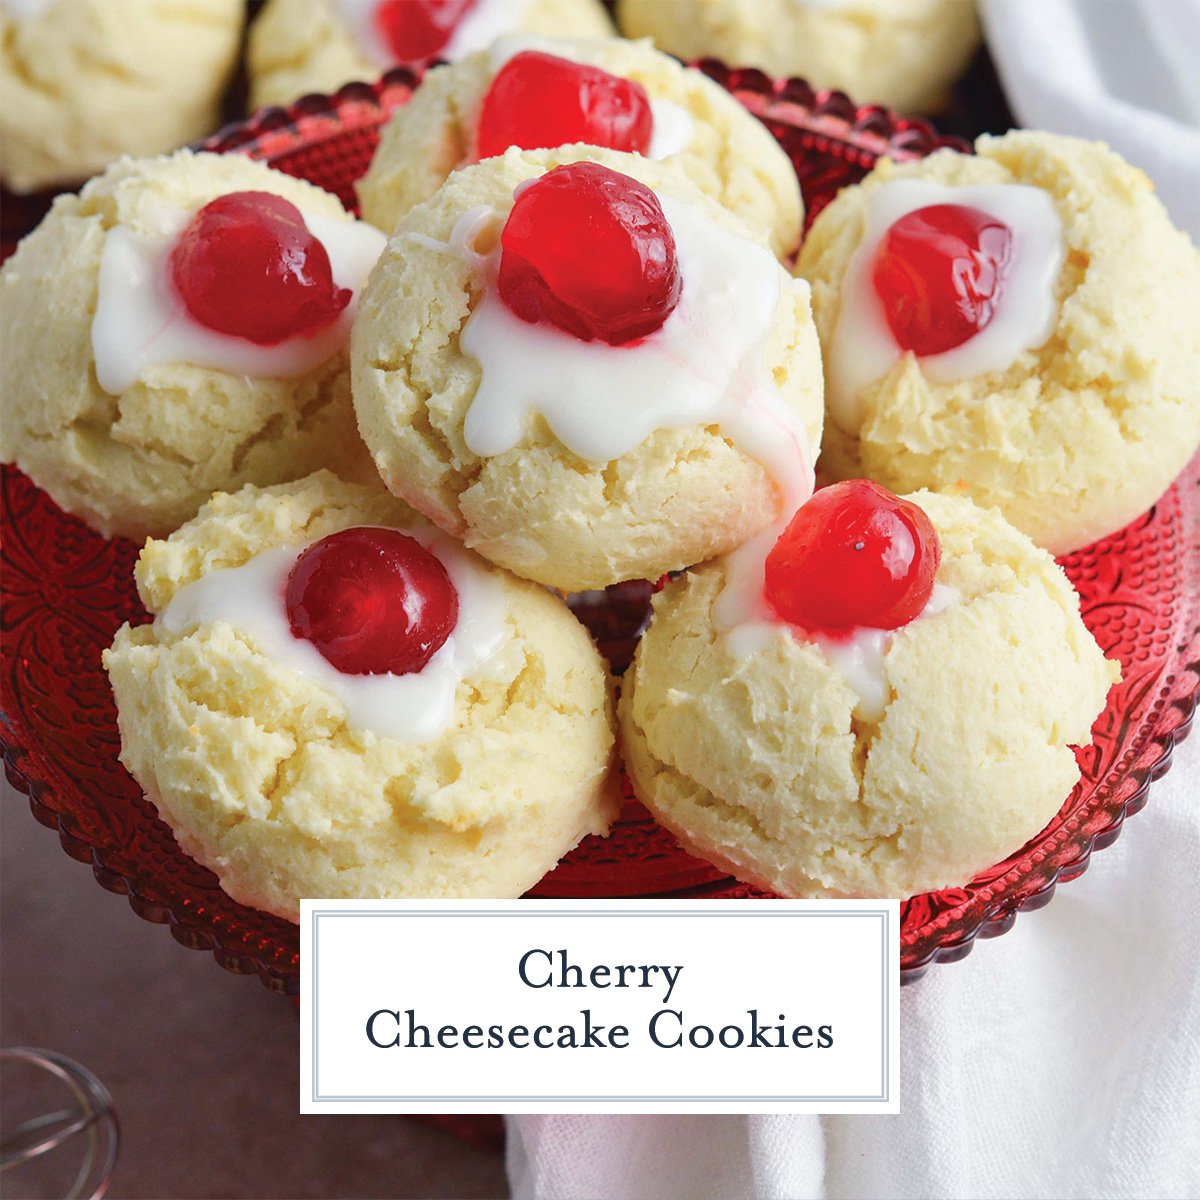 platter of cheesecake cookies with cherries with text overlay